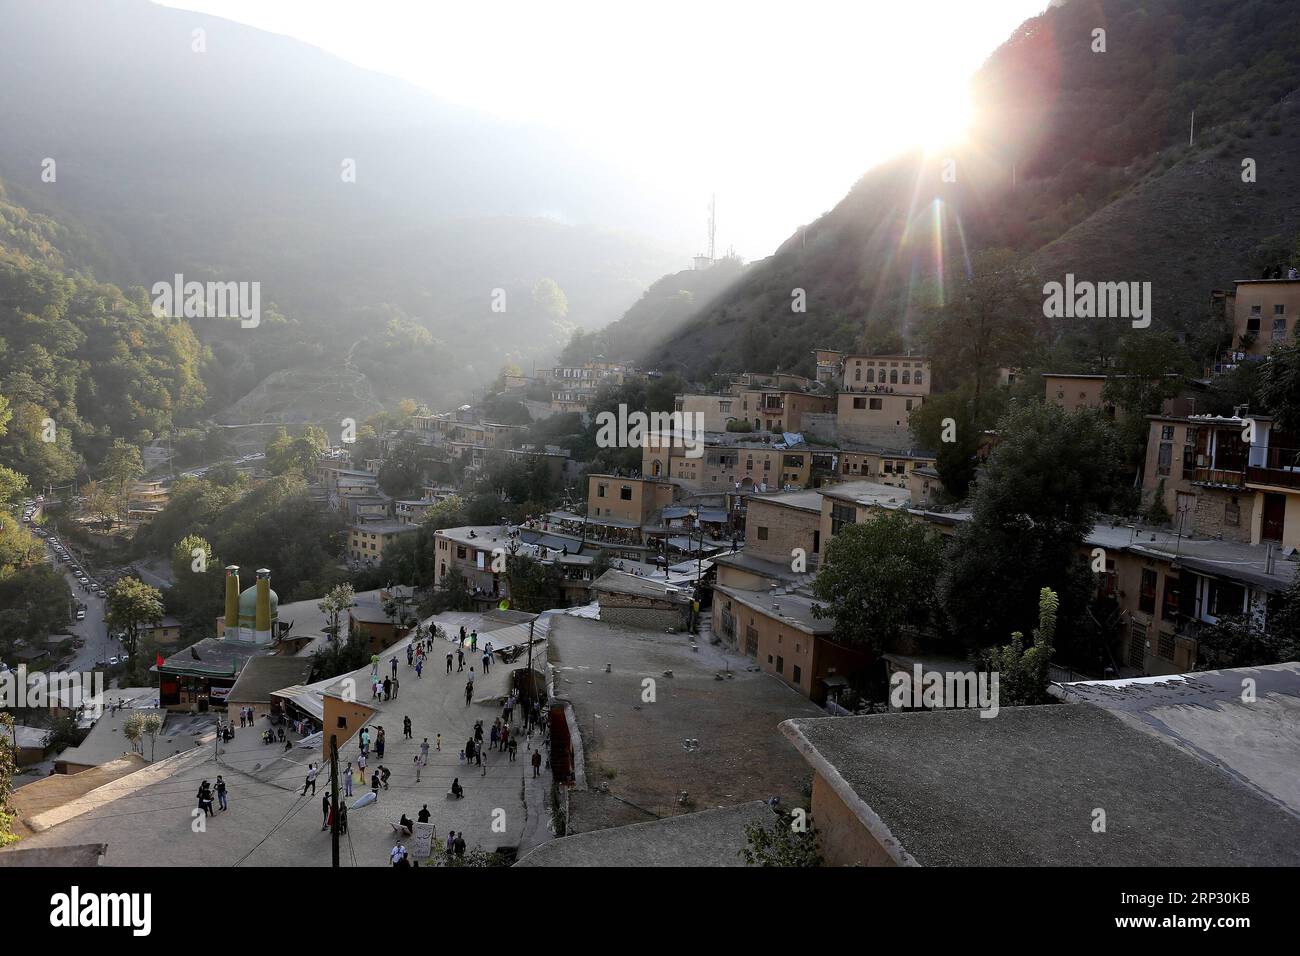 (180915) -- MASOULEH, Sept. 15, 2018 -- Photo taken on Sept. 14, 2018 shows a view of Masouleh, northern Iran. The historical town of Masouleh, famous for its interconnected buildings and courtyards and roofs serving as pedestrian areas similar to streets, has an attractive nature and architecture with an antiquity of more than 1,000 years. ) IRAN-MASOULEH-VIEW AhmadxHalabisaz PUBLICATIONxNOTxINxCHN Stock Photo